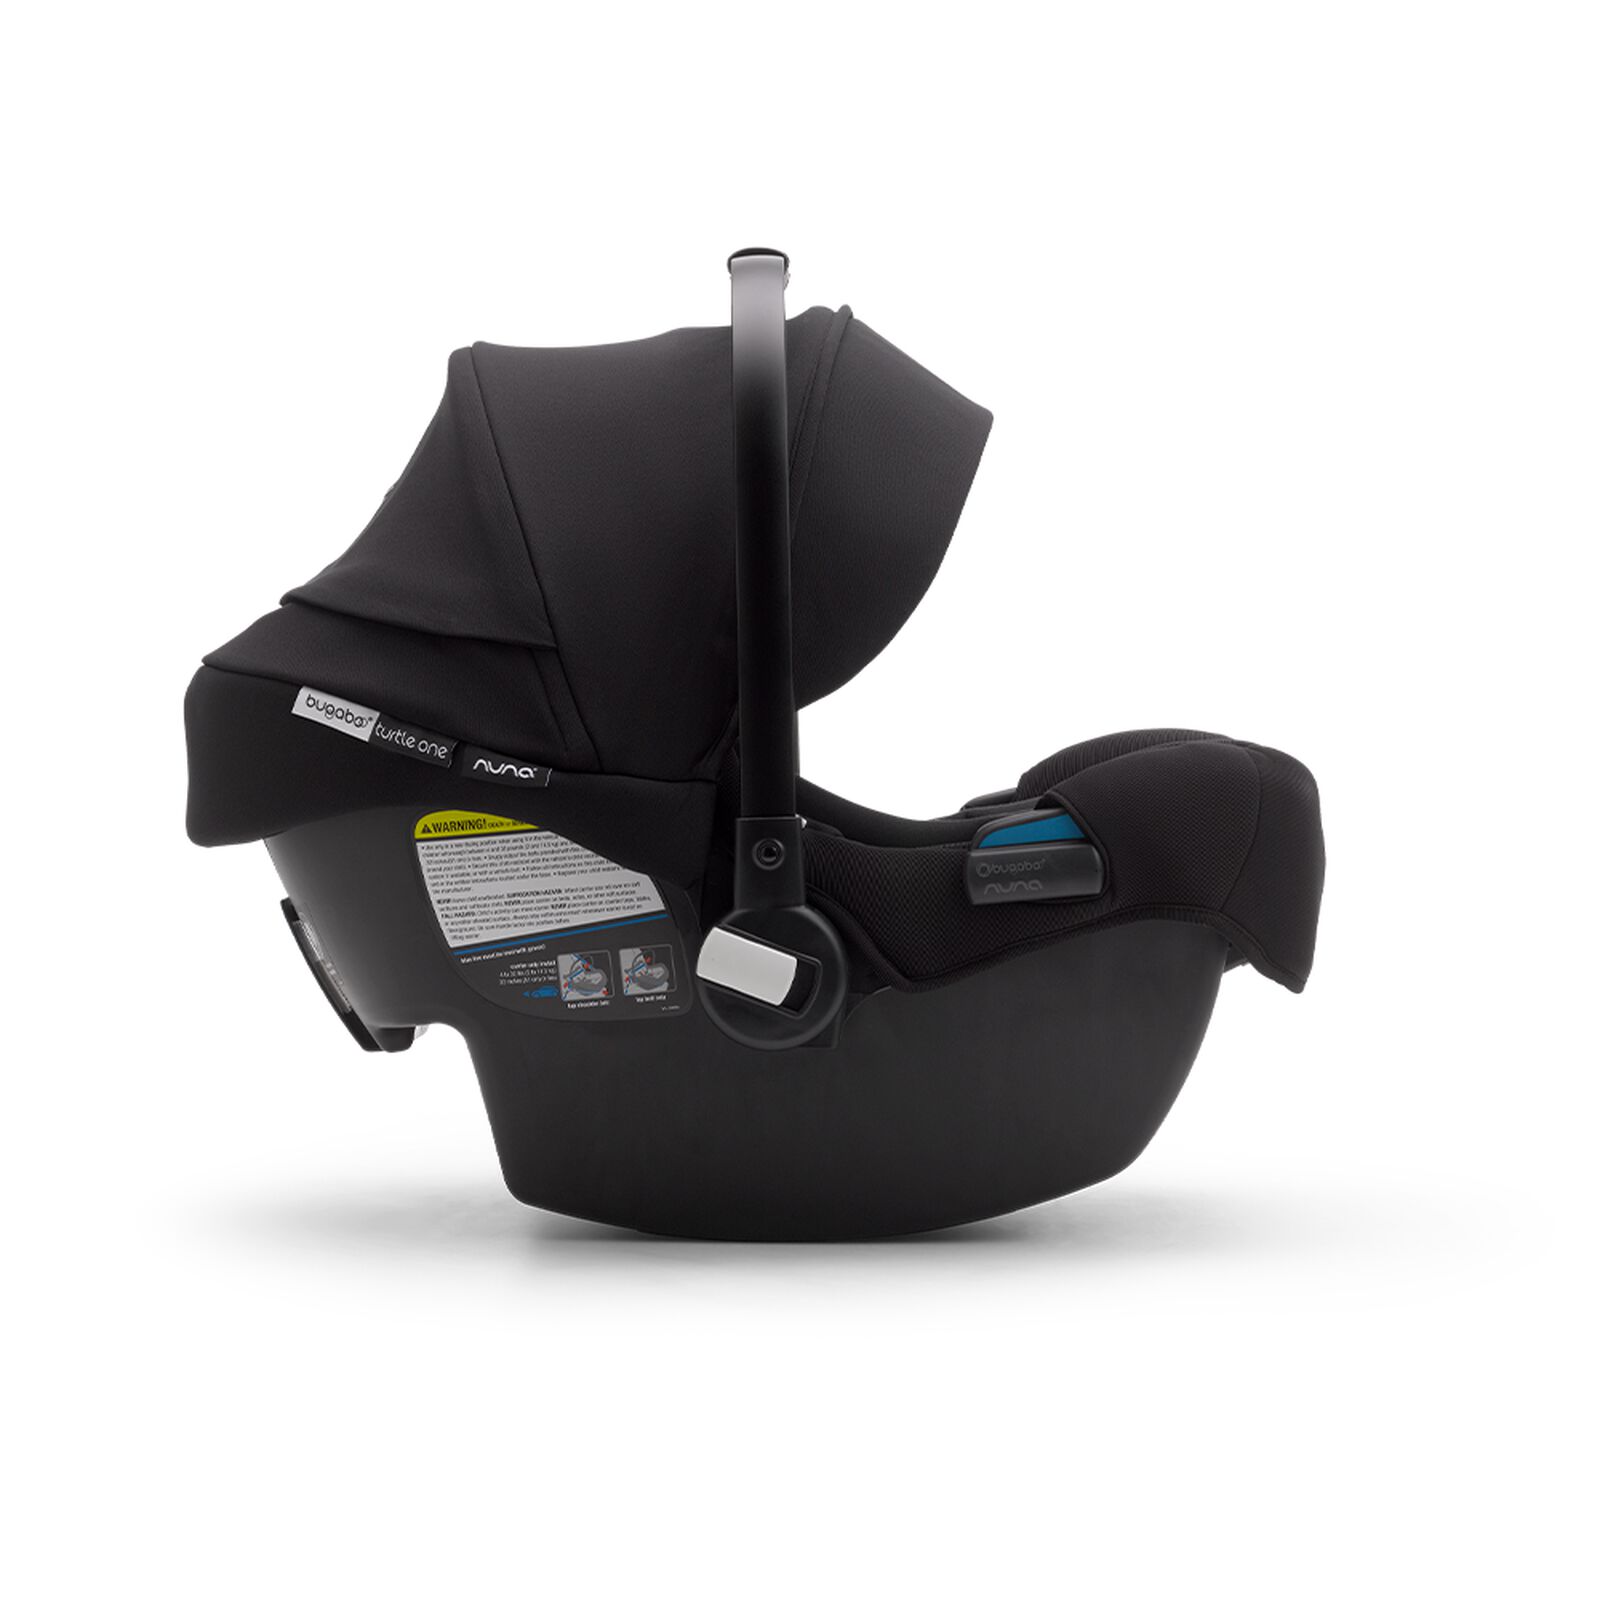 Bugaboo Turtle One by Nuna car seat with base - View 5